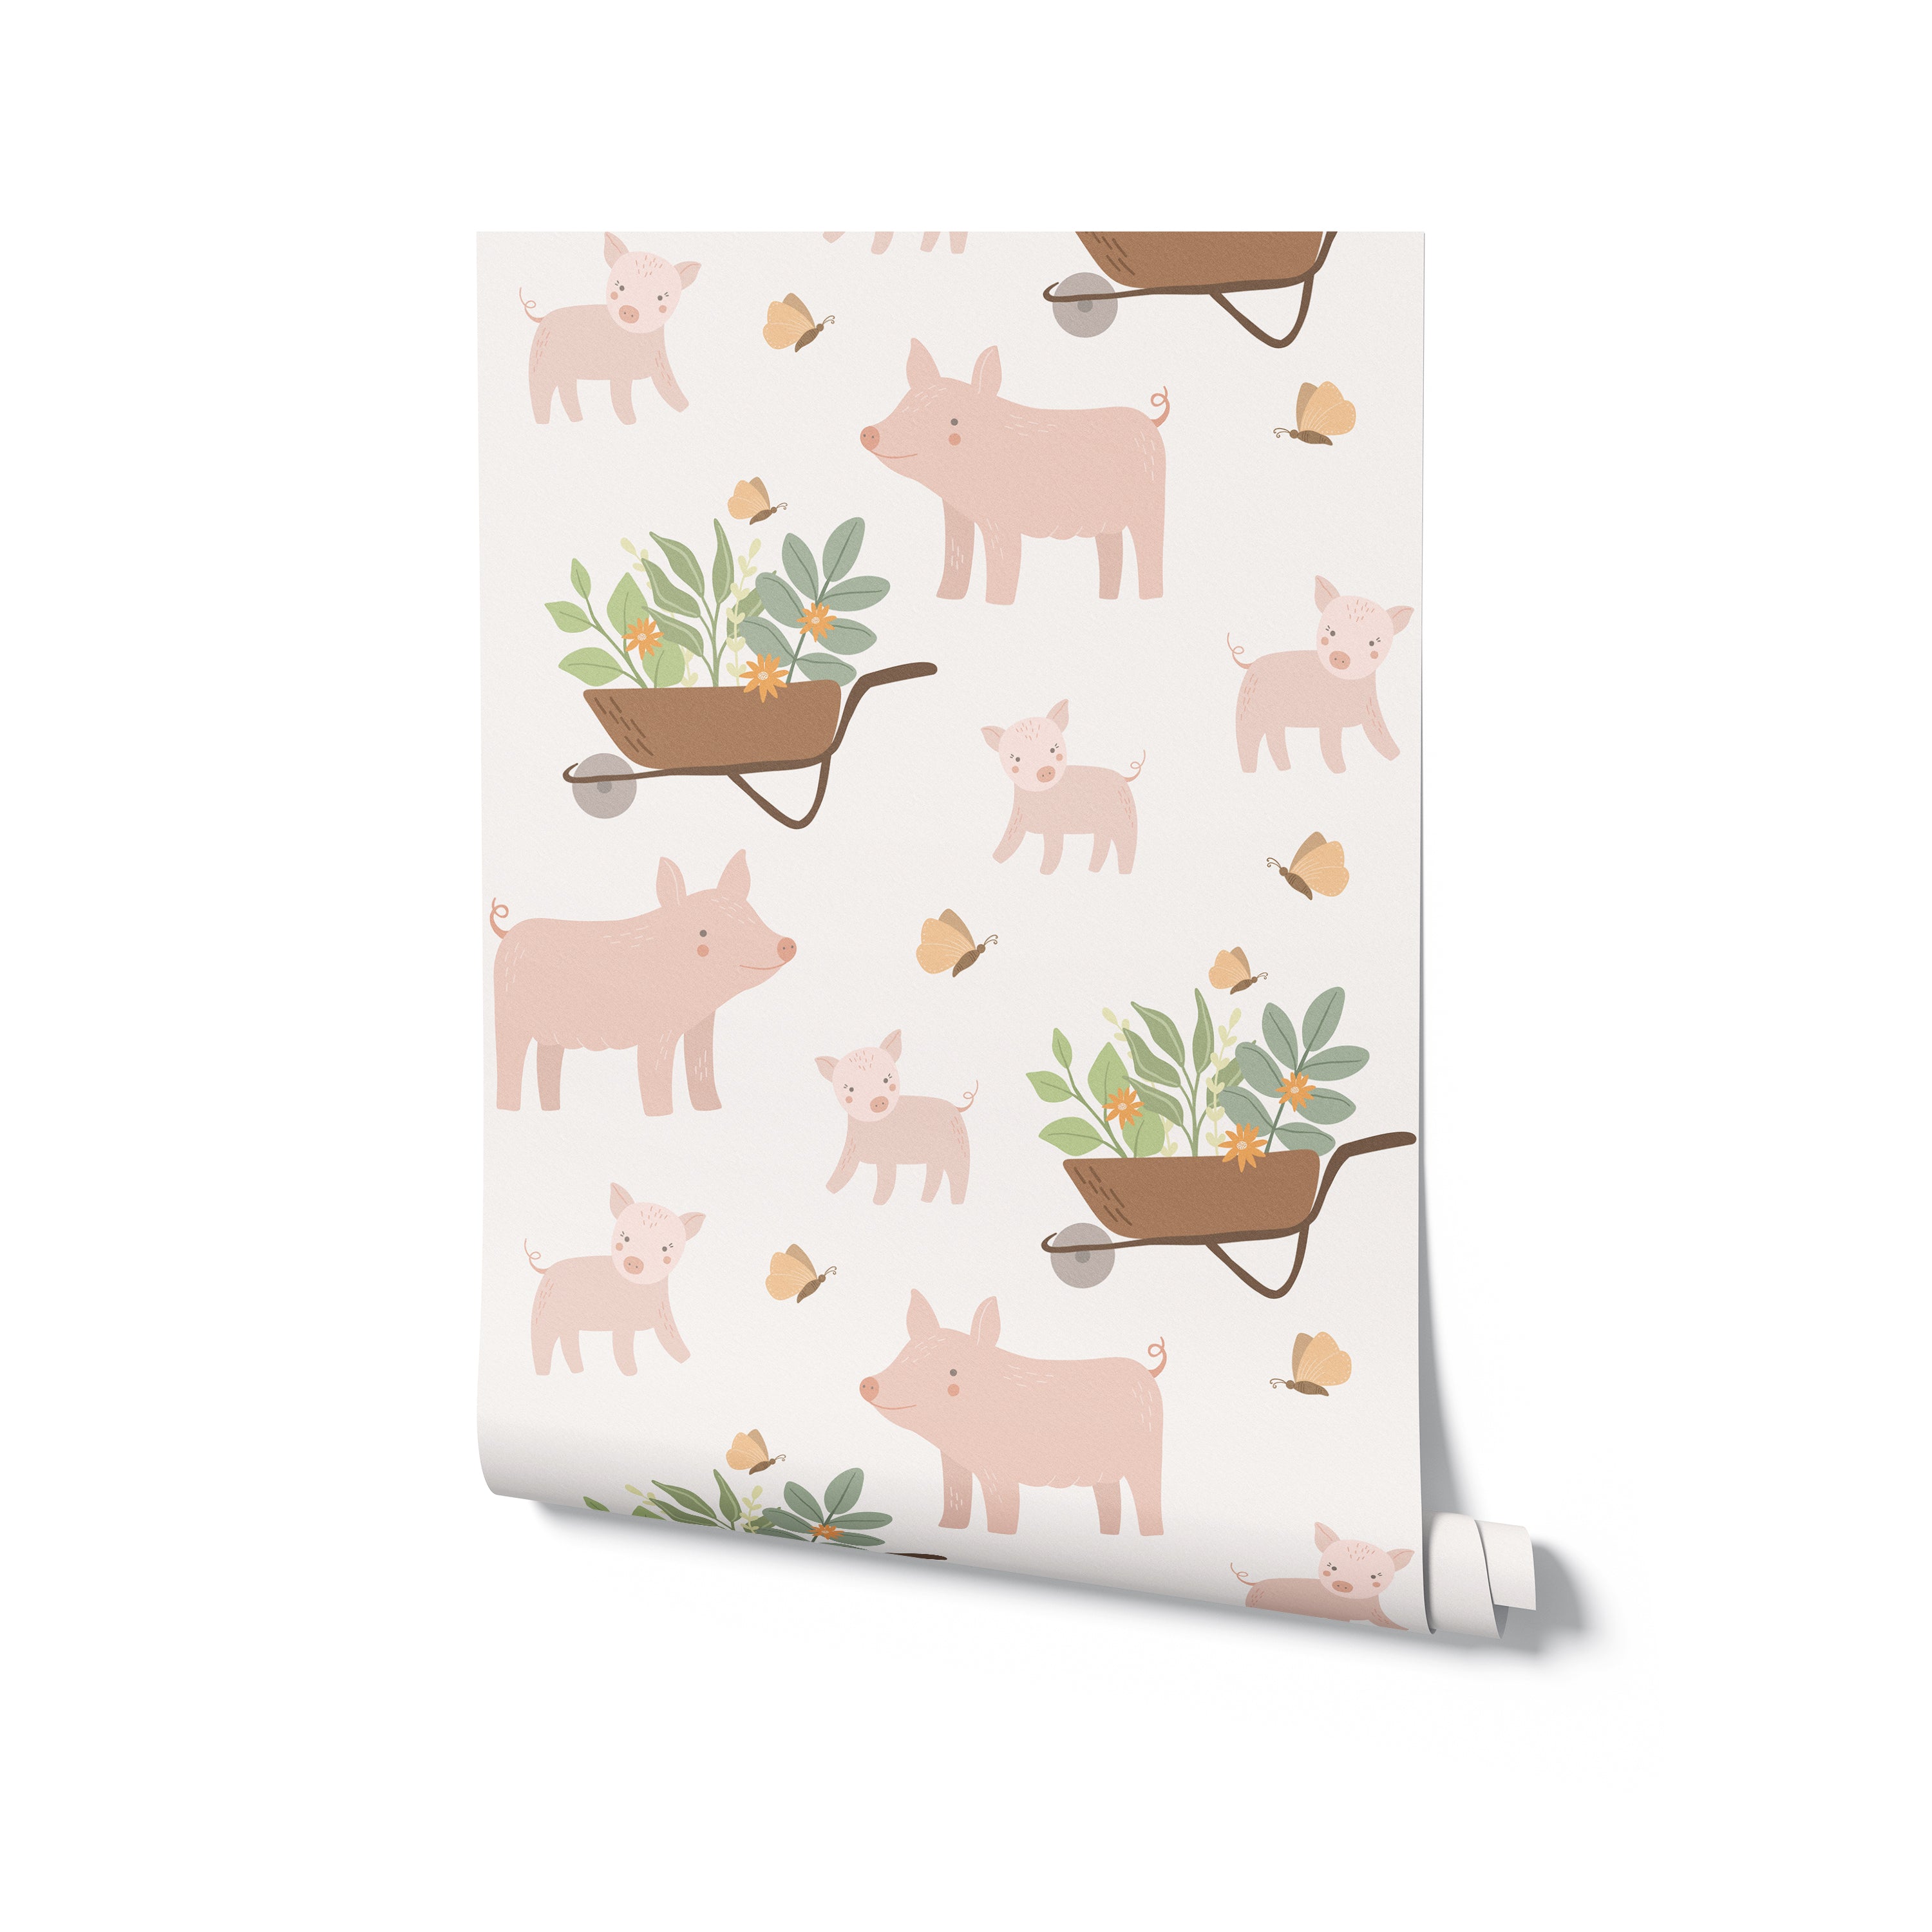 Roll of children's wallpaper displaying an adorable scene of pink pigs, green plants, and orange flowers in wheelbarrows, interspersed with butterflies, set against a light background, perfect for brightening up any play area or nursery